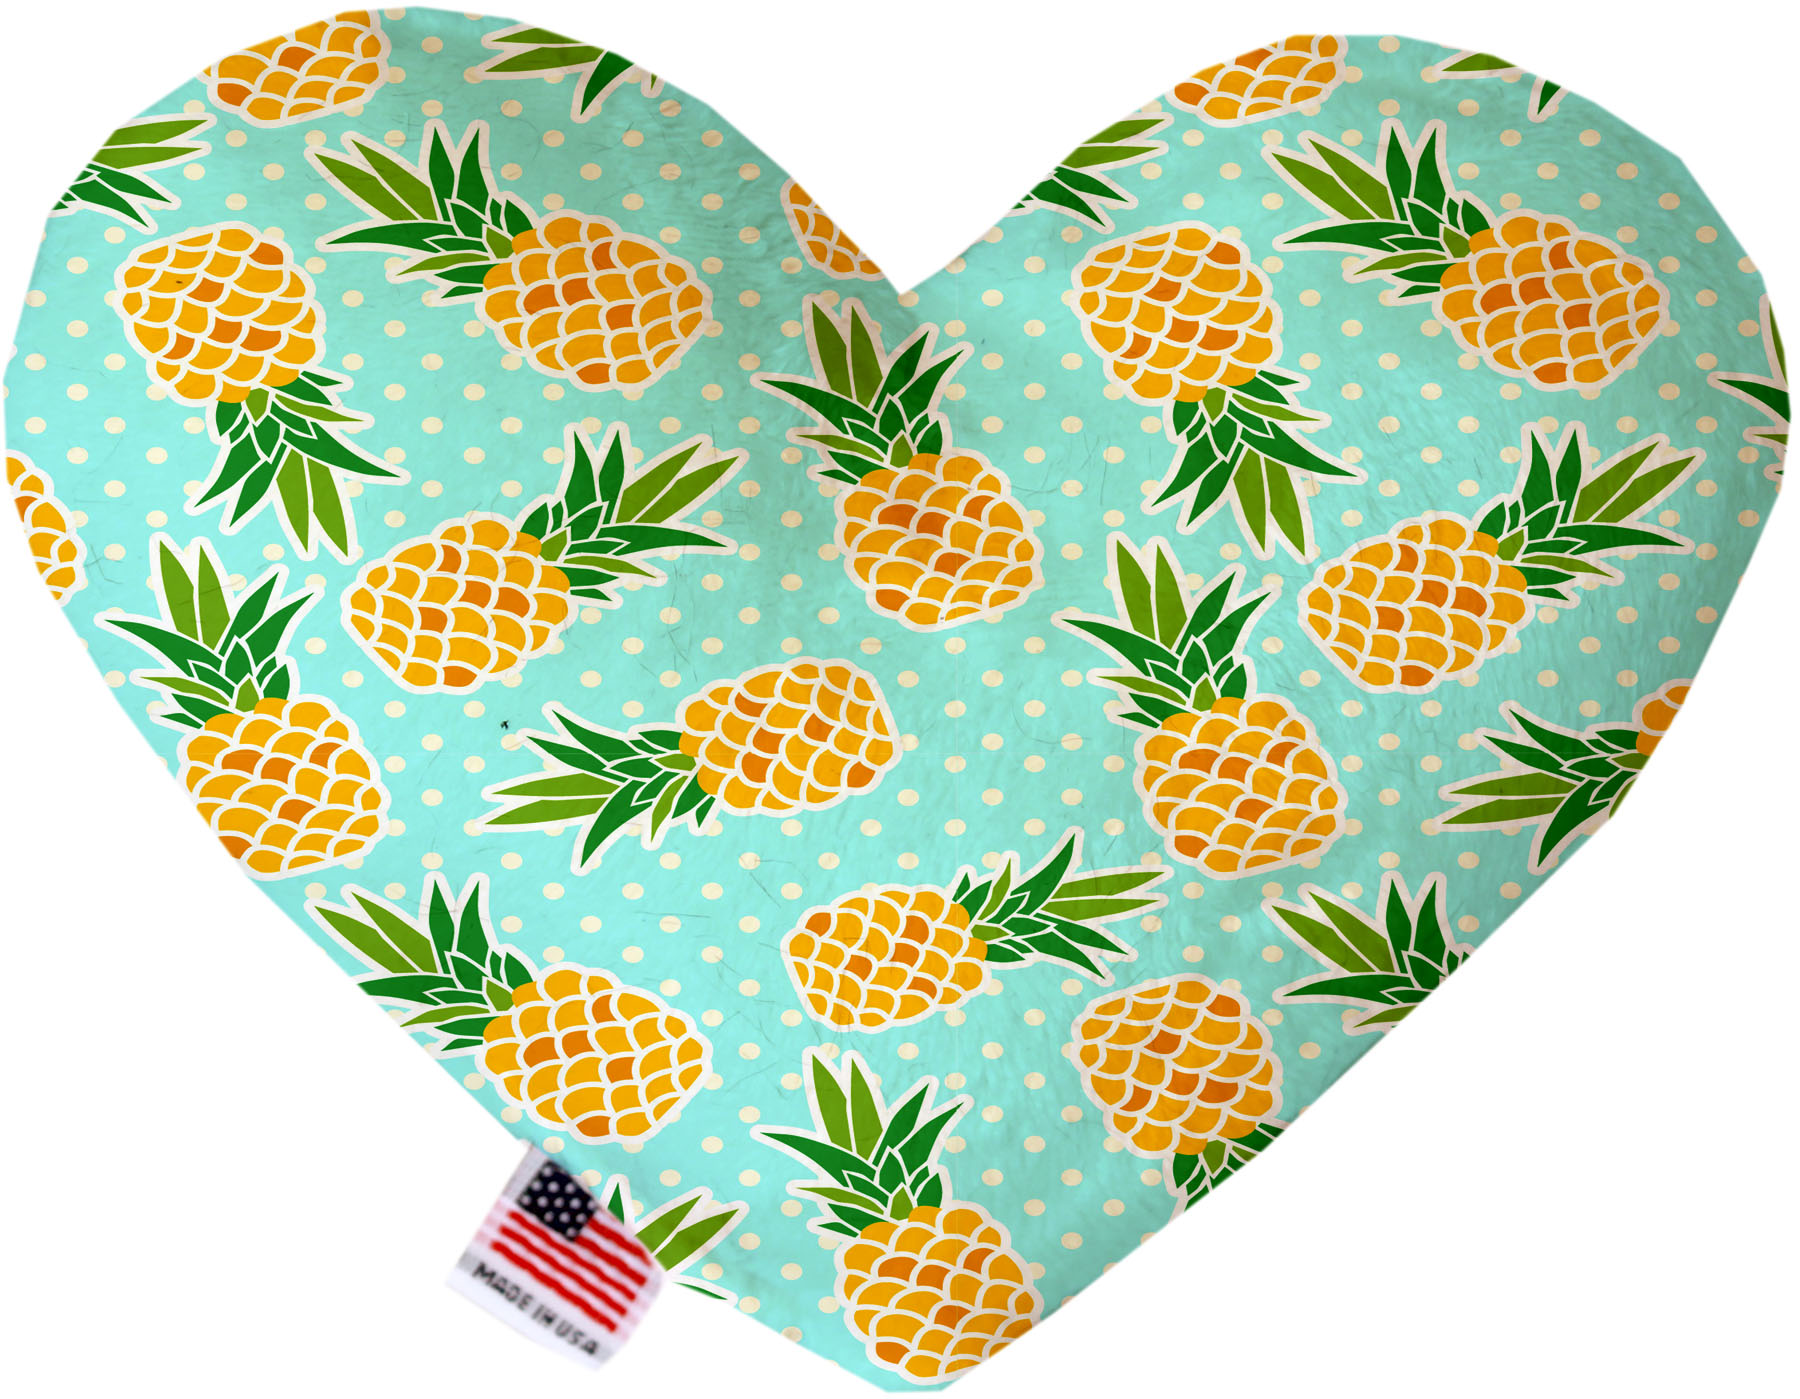 Pineapples and Polka Dots 8 inch Canvas Heart Dog Toy